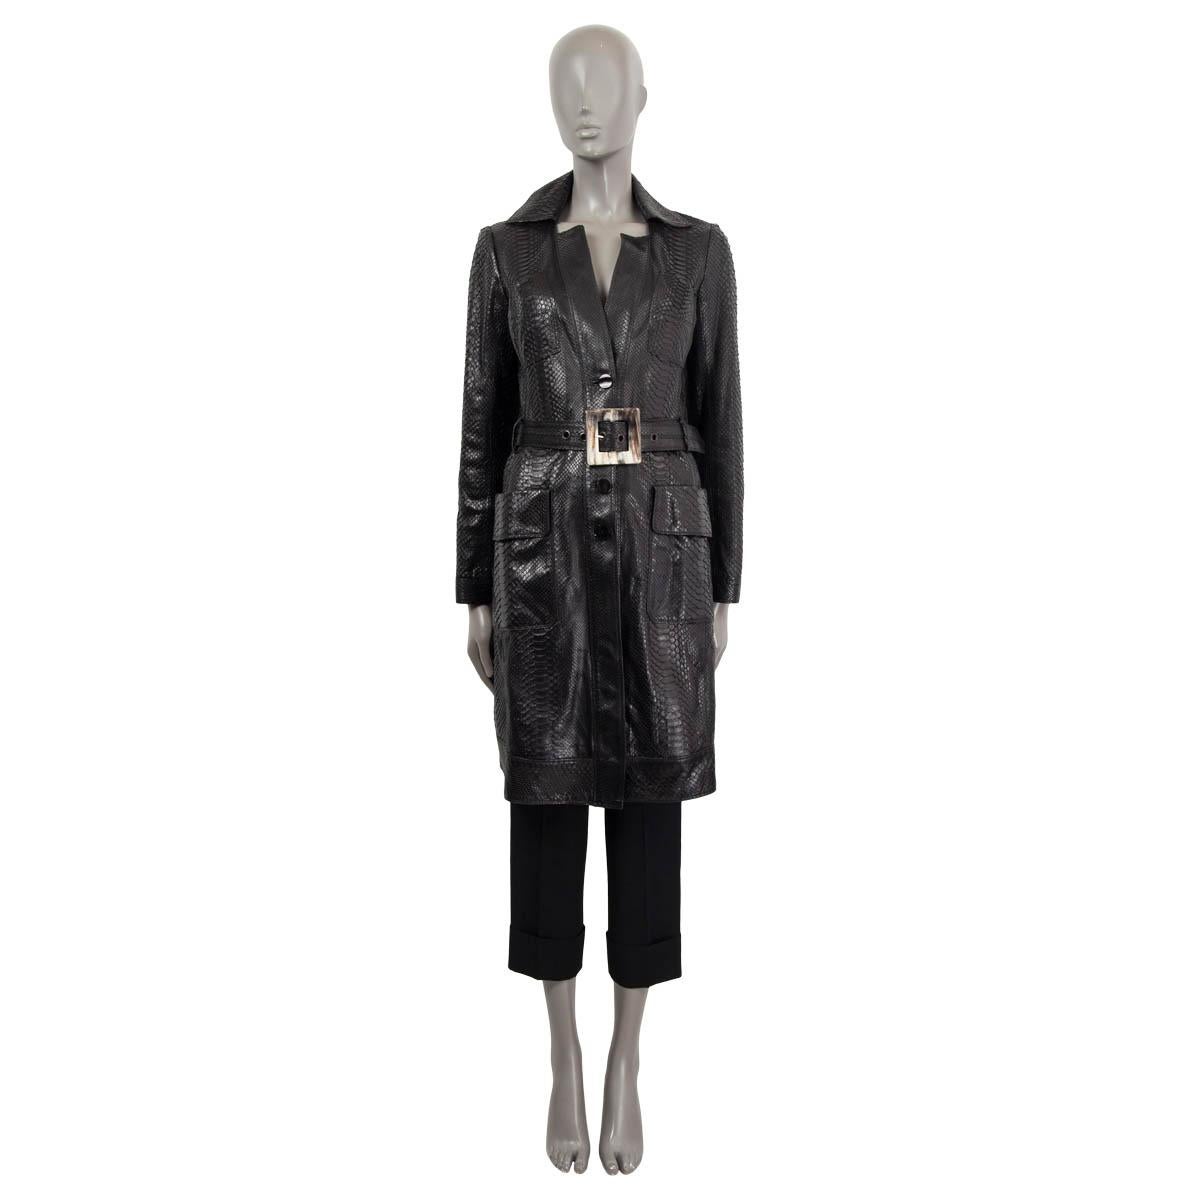 100% authentic Jitrois belted coat in black python (100%). Features four patch pockets on the front and a belt with a horn buckle. Three buttons on the arm and a slit. Opens with buttons on the front.Lining acetate (100%). Has been worn and is in